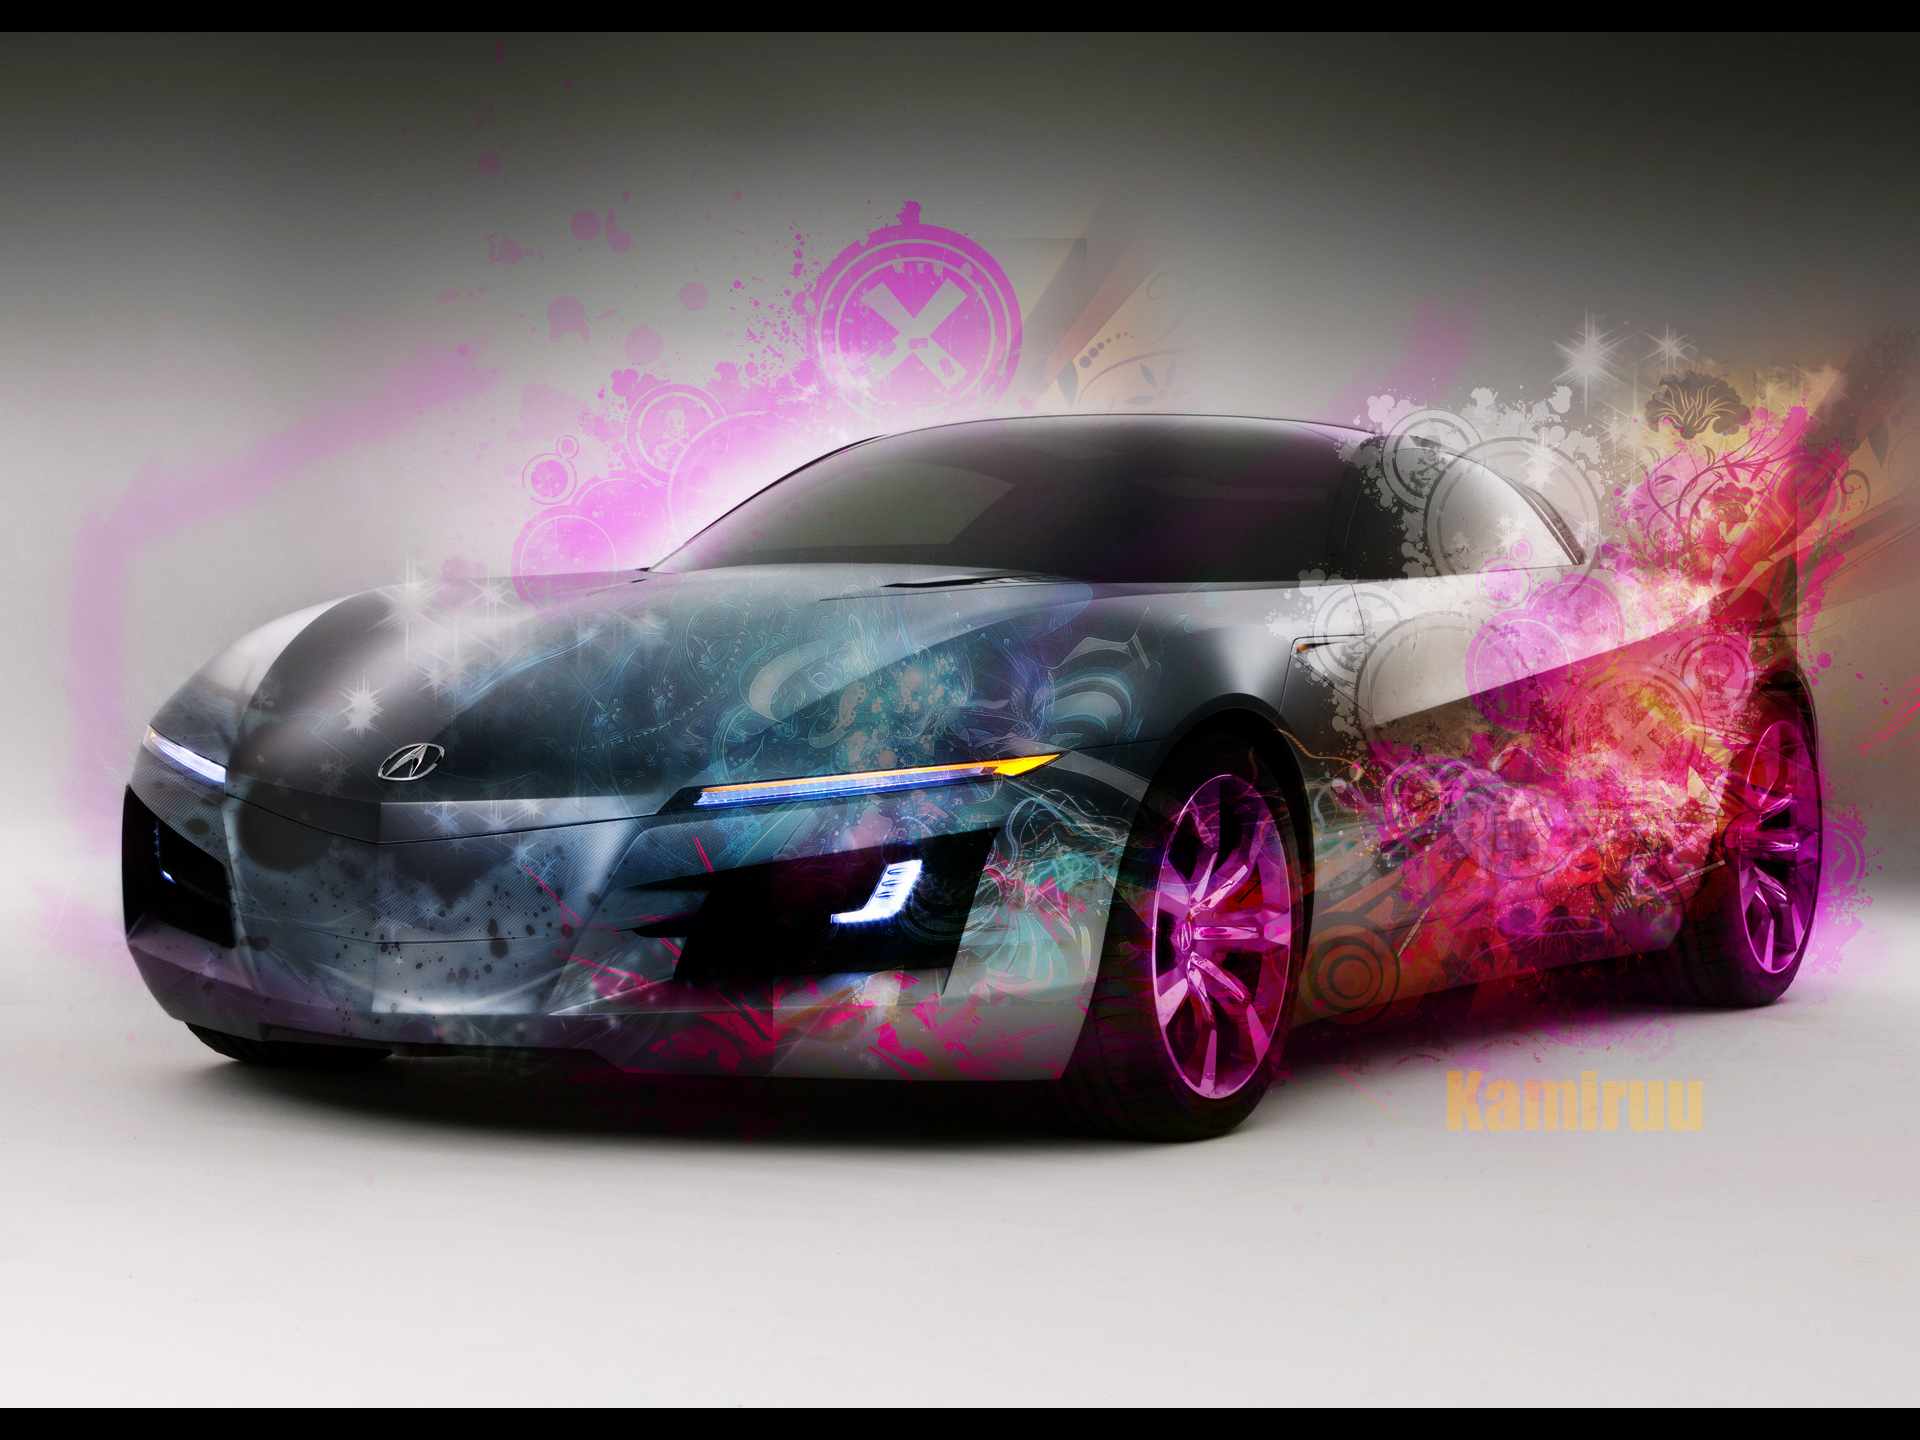 Abstract Car Wallpapers